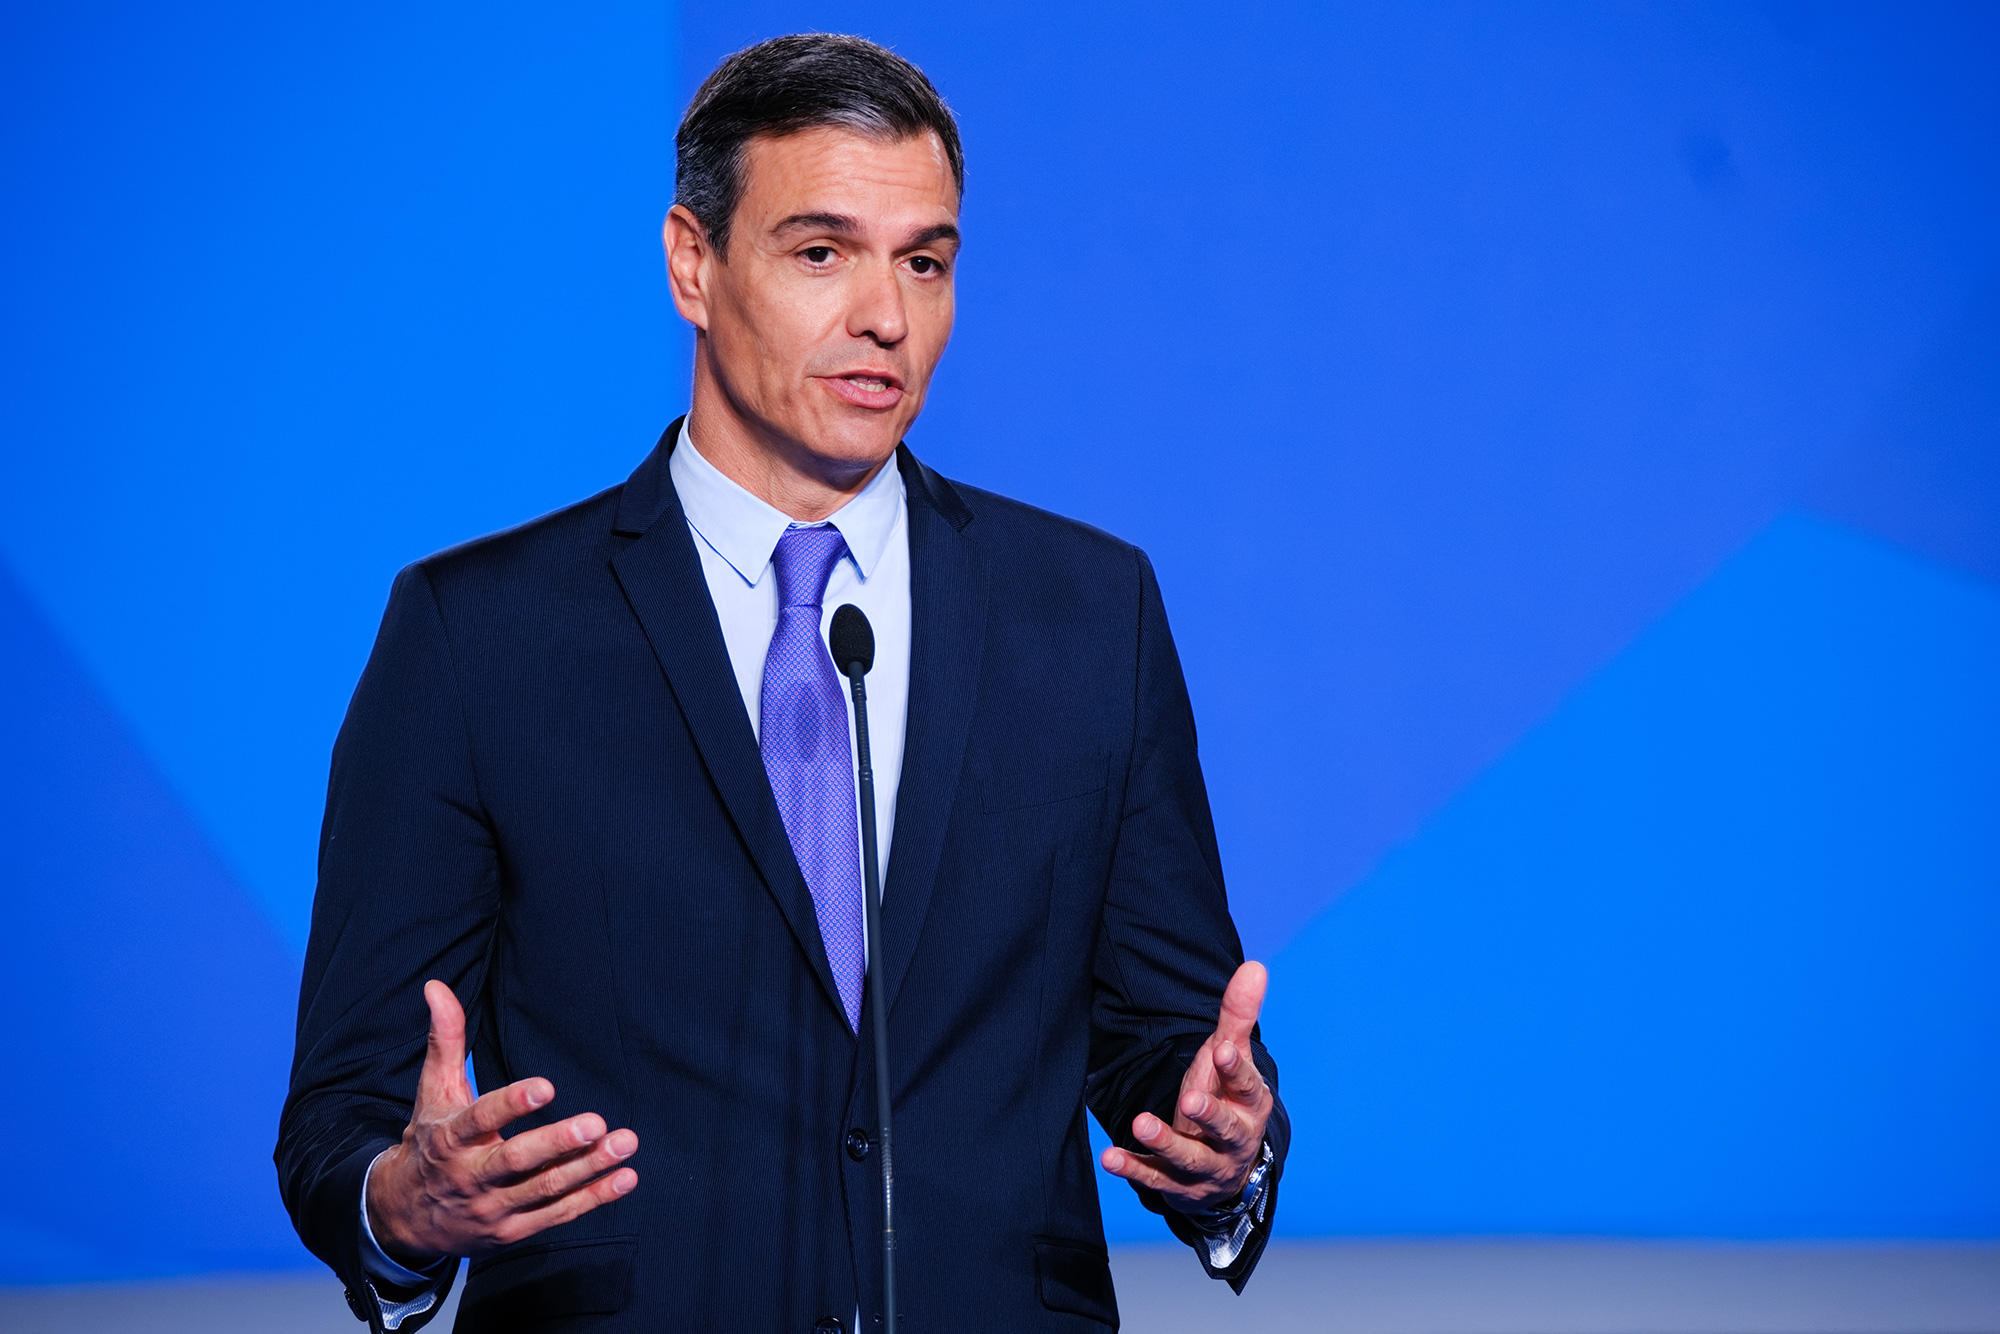 Spanish Prime Minister Pedro Sánchez speaks at the NATO Summit in Madrid, Spain on Tuesday, June 28.